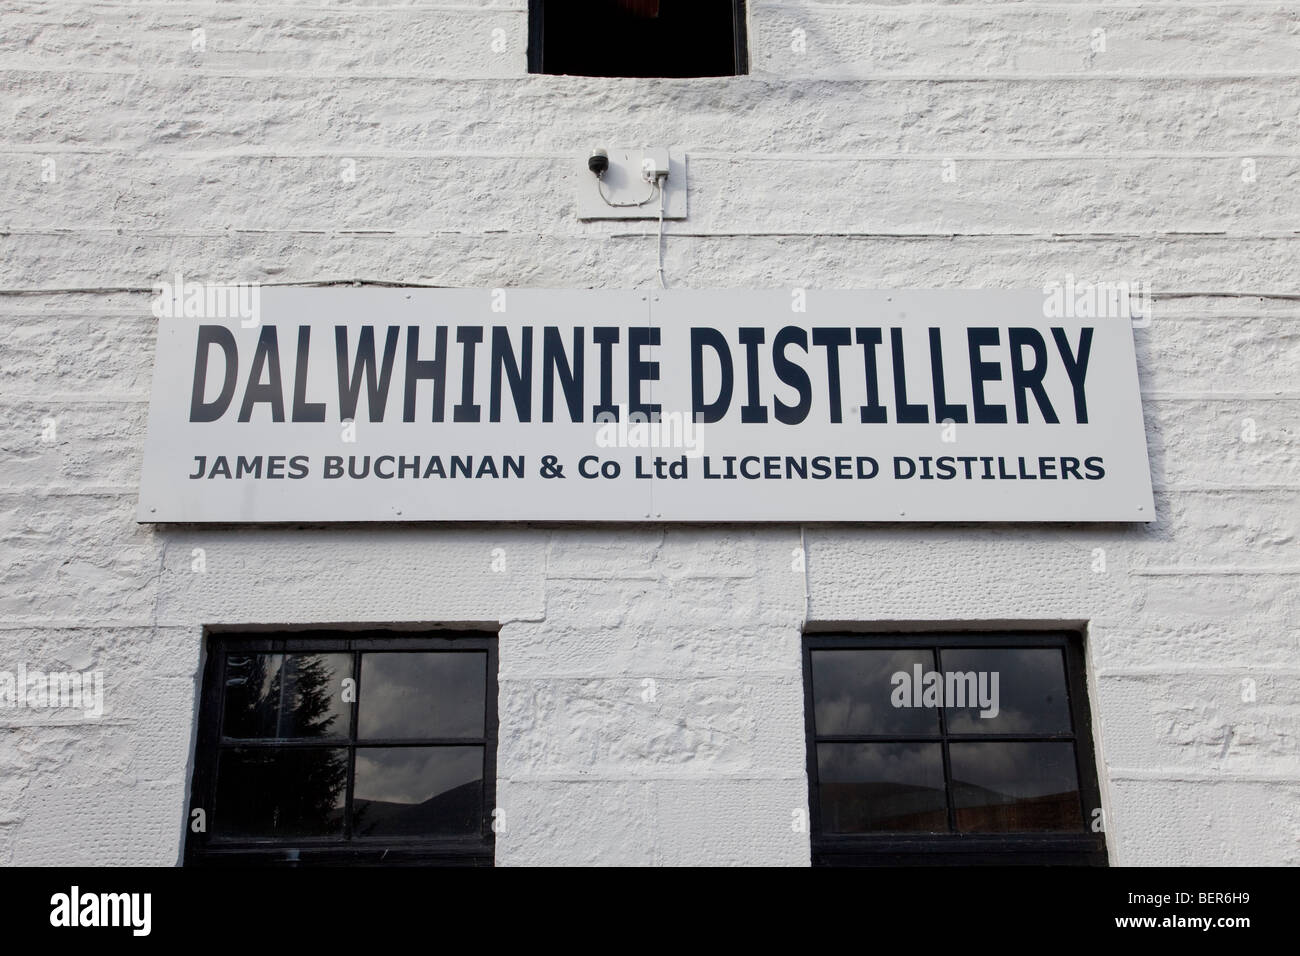 Dalwhinnie Distillery sign Stock Photo